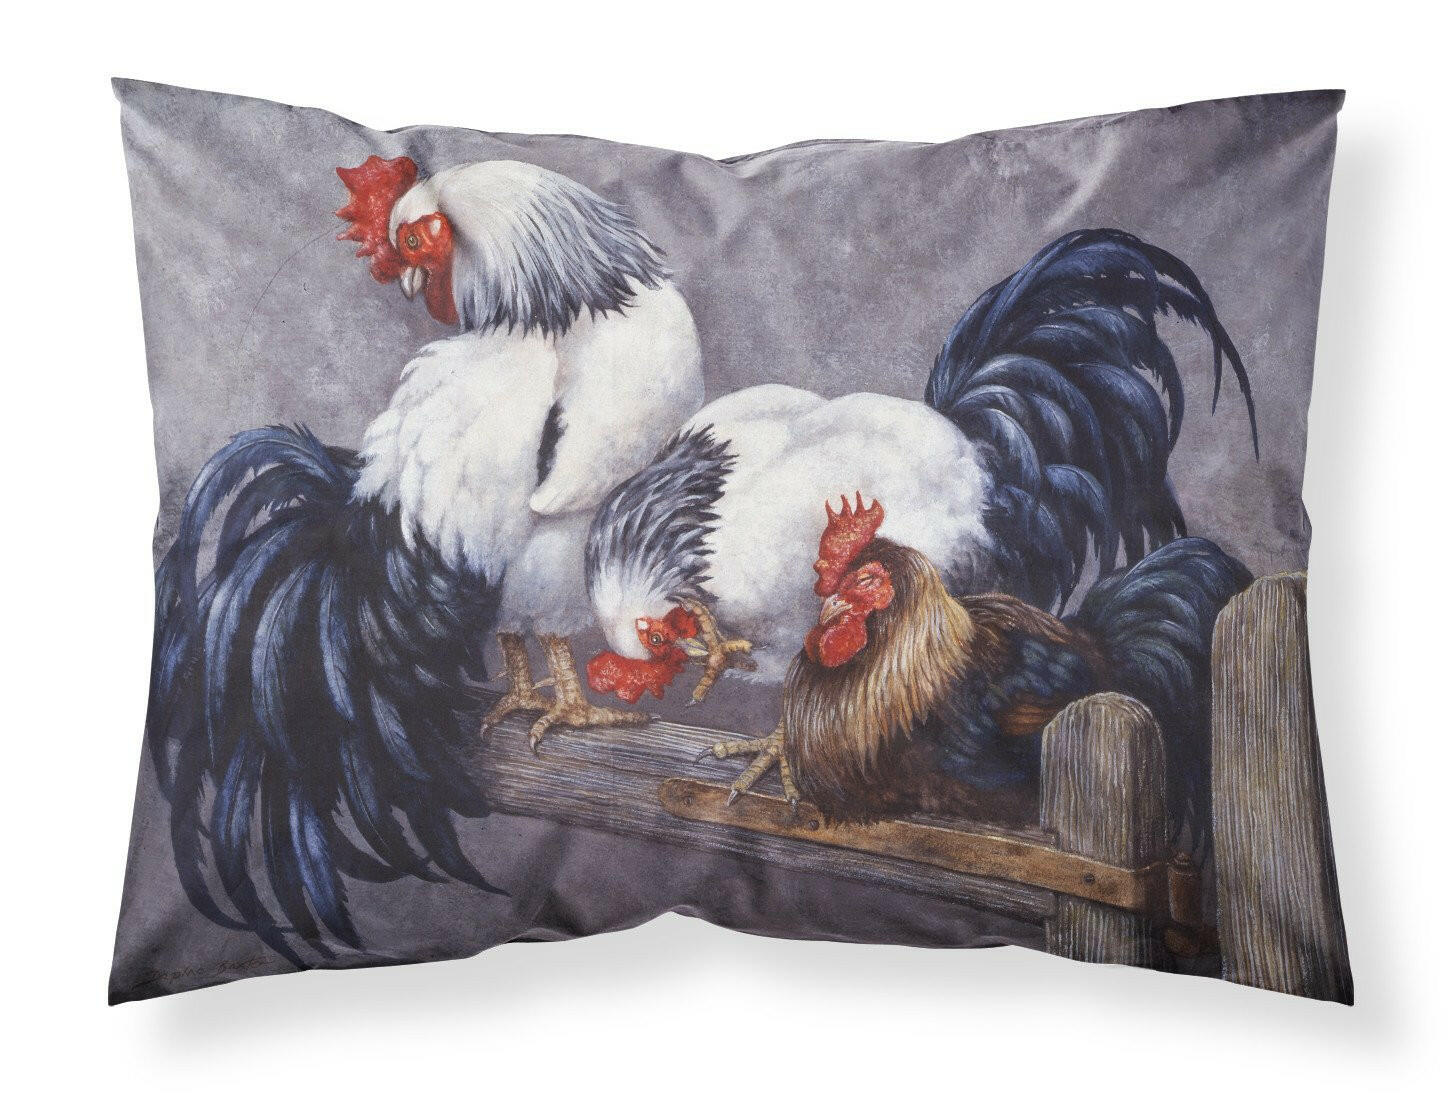 Roosters Roosting Fabric Standard Pillowcase BDBA0208PILLOWCASE by Caroline's Treasures